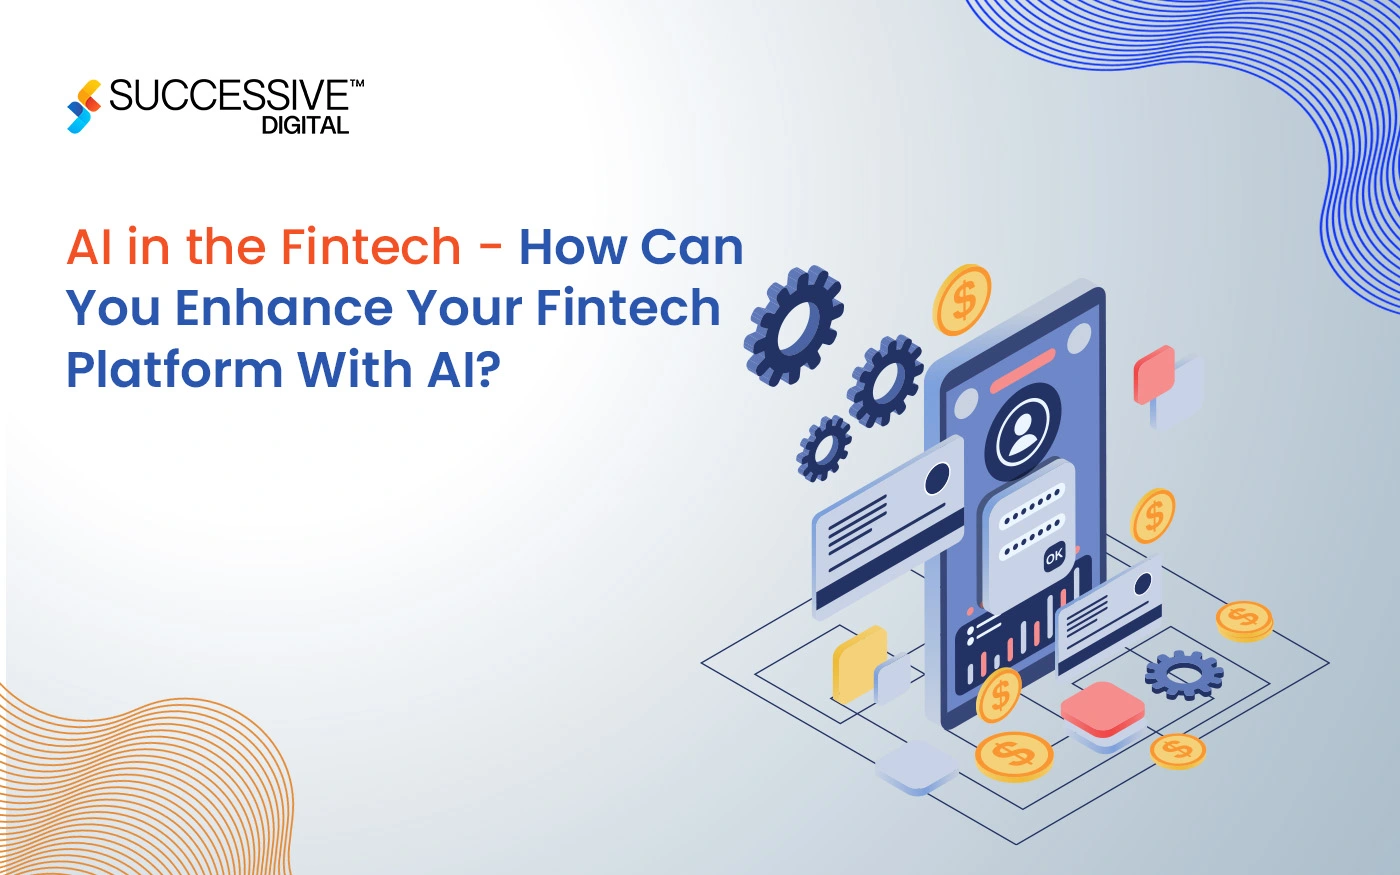 AI in the Fintech – How Can You Enhance Your Fintech Platform With AI?